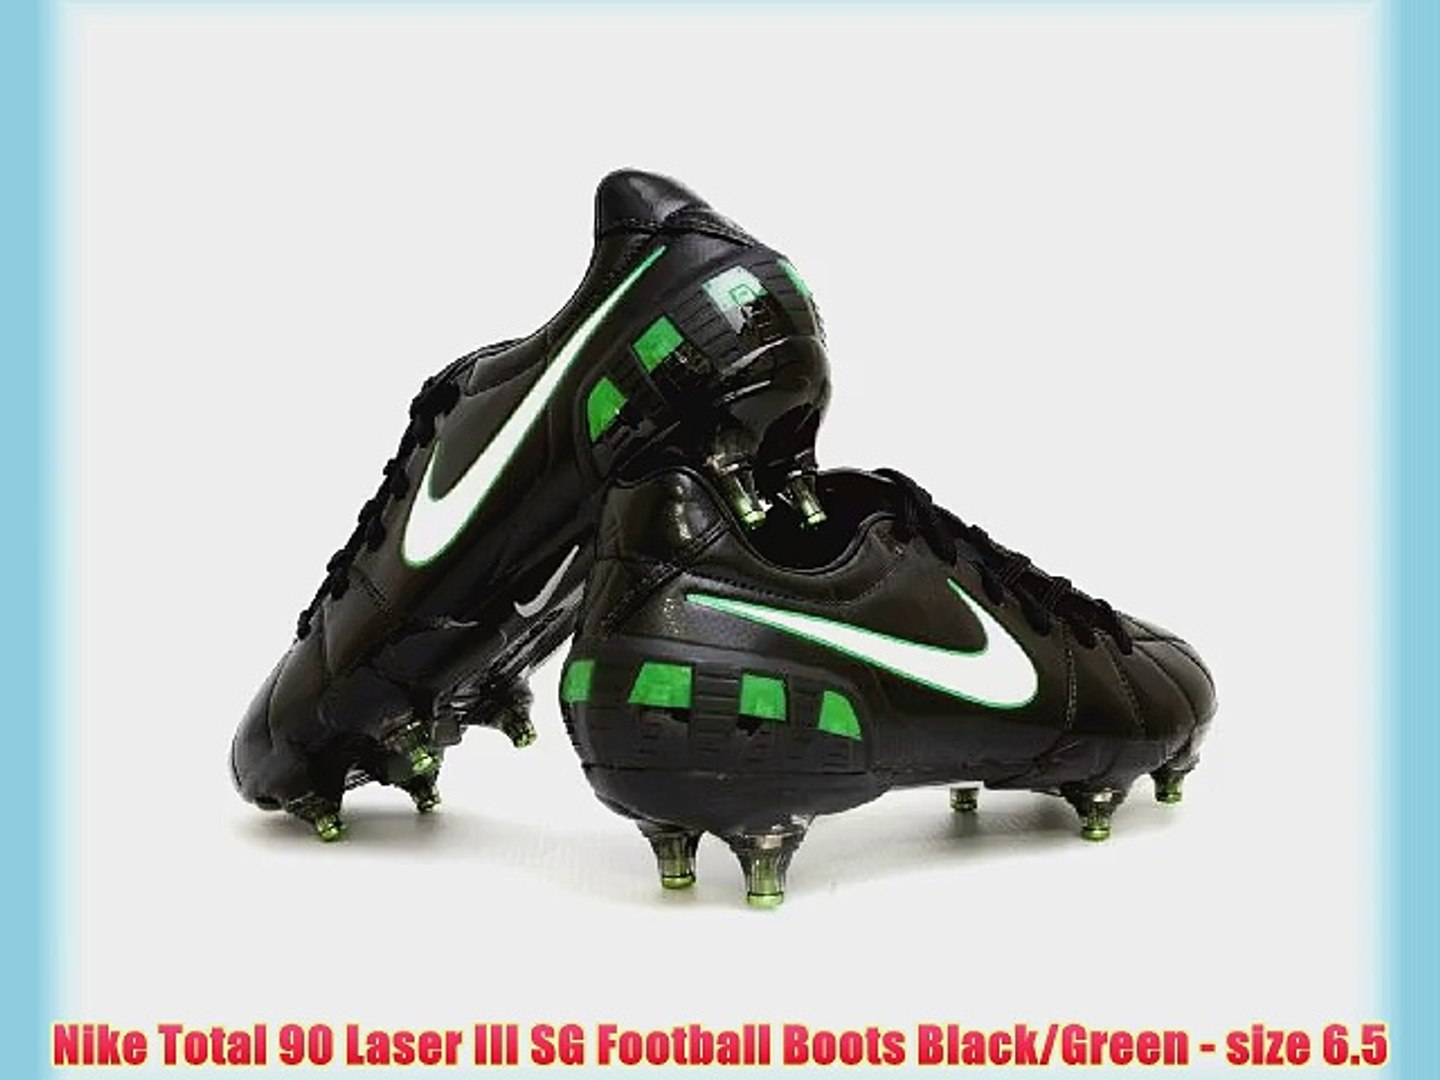 Nike Total 90 Laser III SG Football Boots Black/Green - size 6.5 - video  Dailymotion